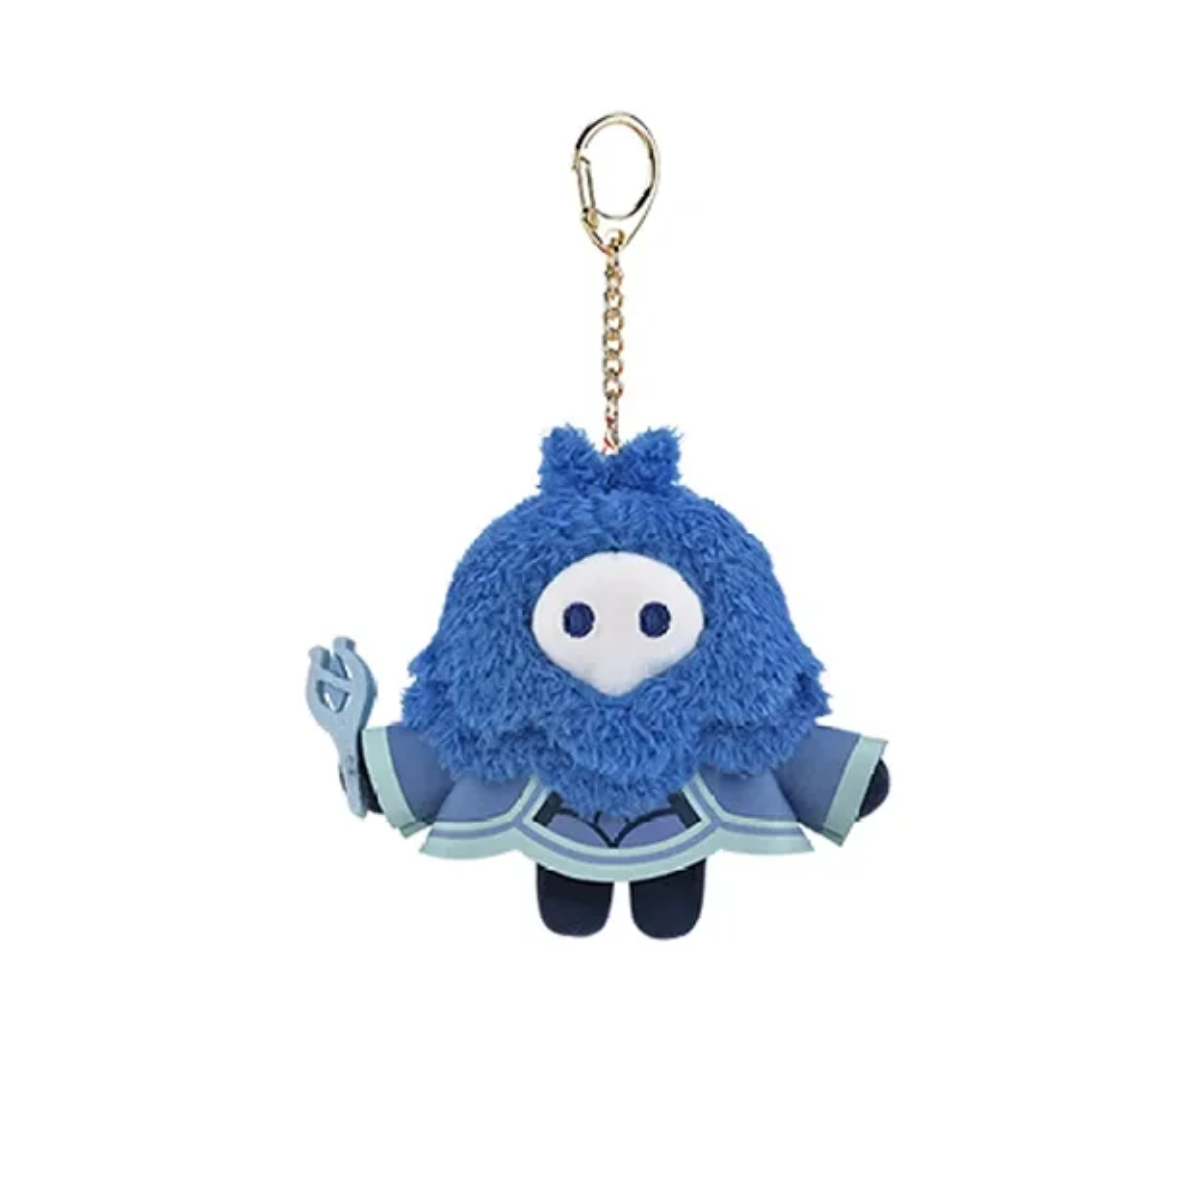 miHoYo Genshin Impact Abyss Mage Plushie Keychain-Hydro Mage-miHoYo-Ace Cards &amp; Collectibles